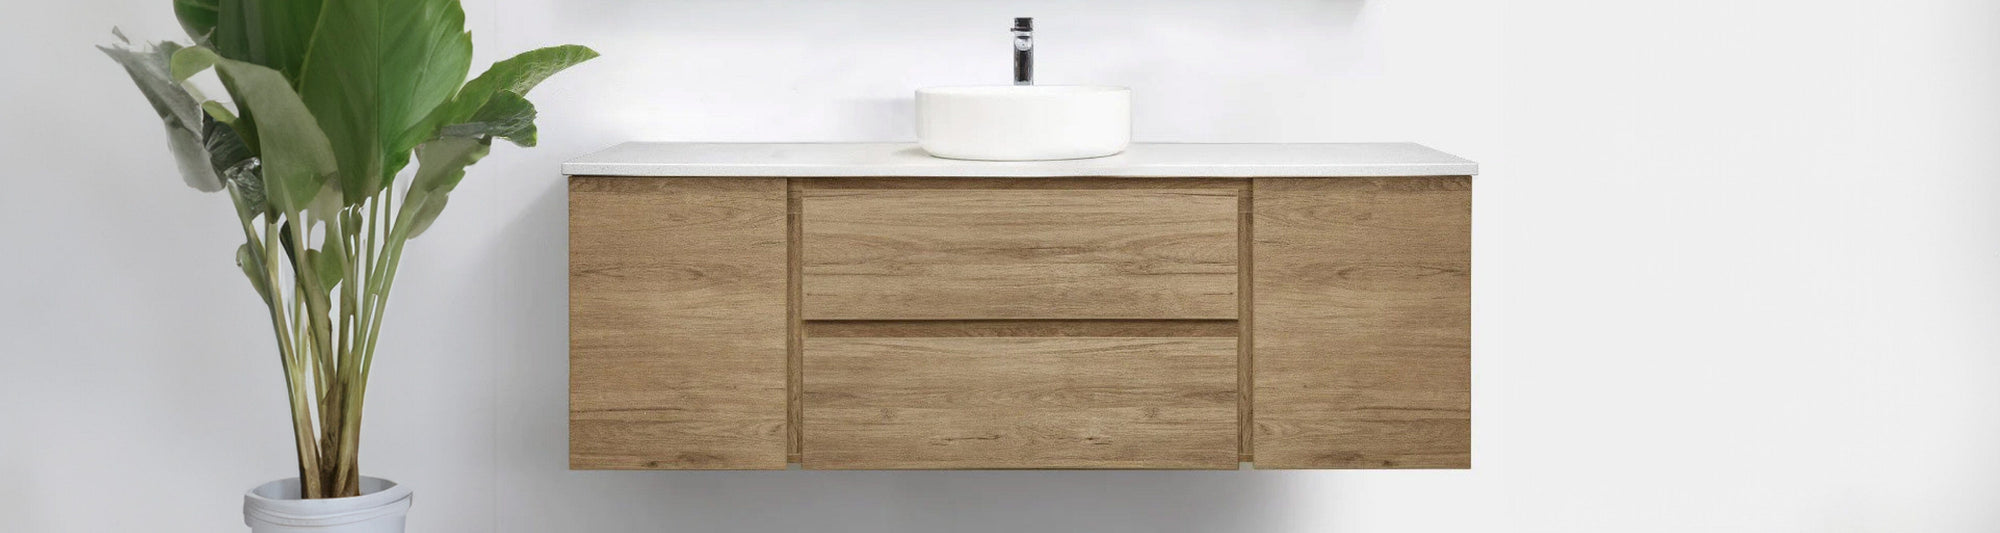 Wall Mounted Cabinets With Drawers